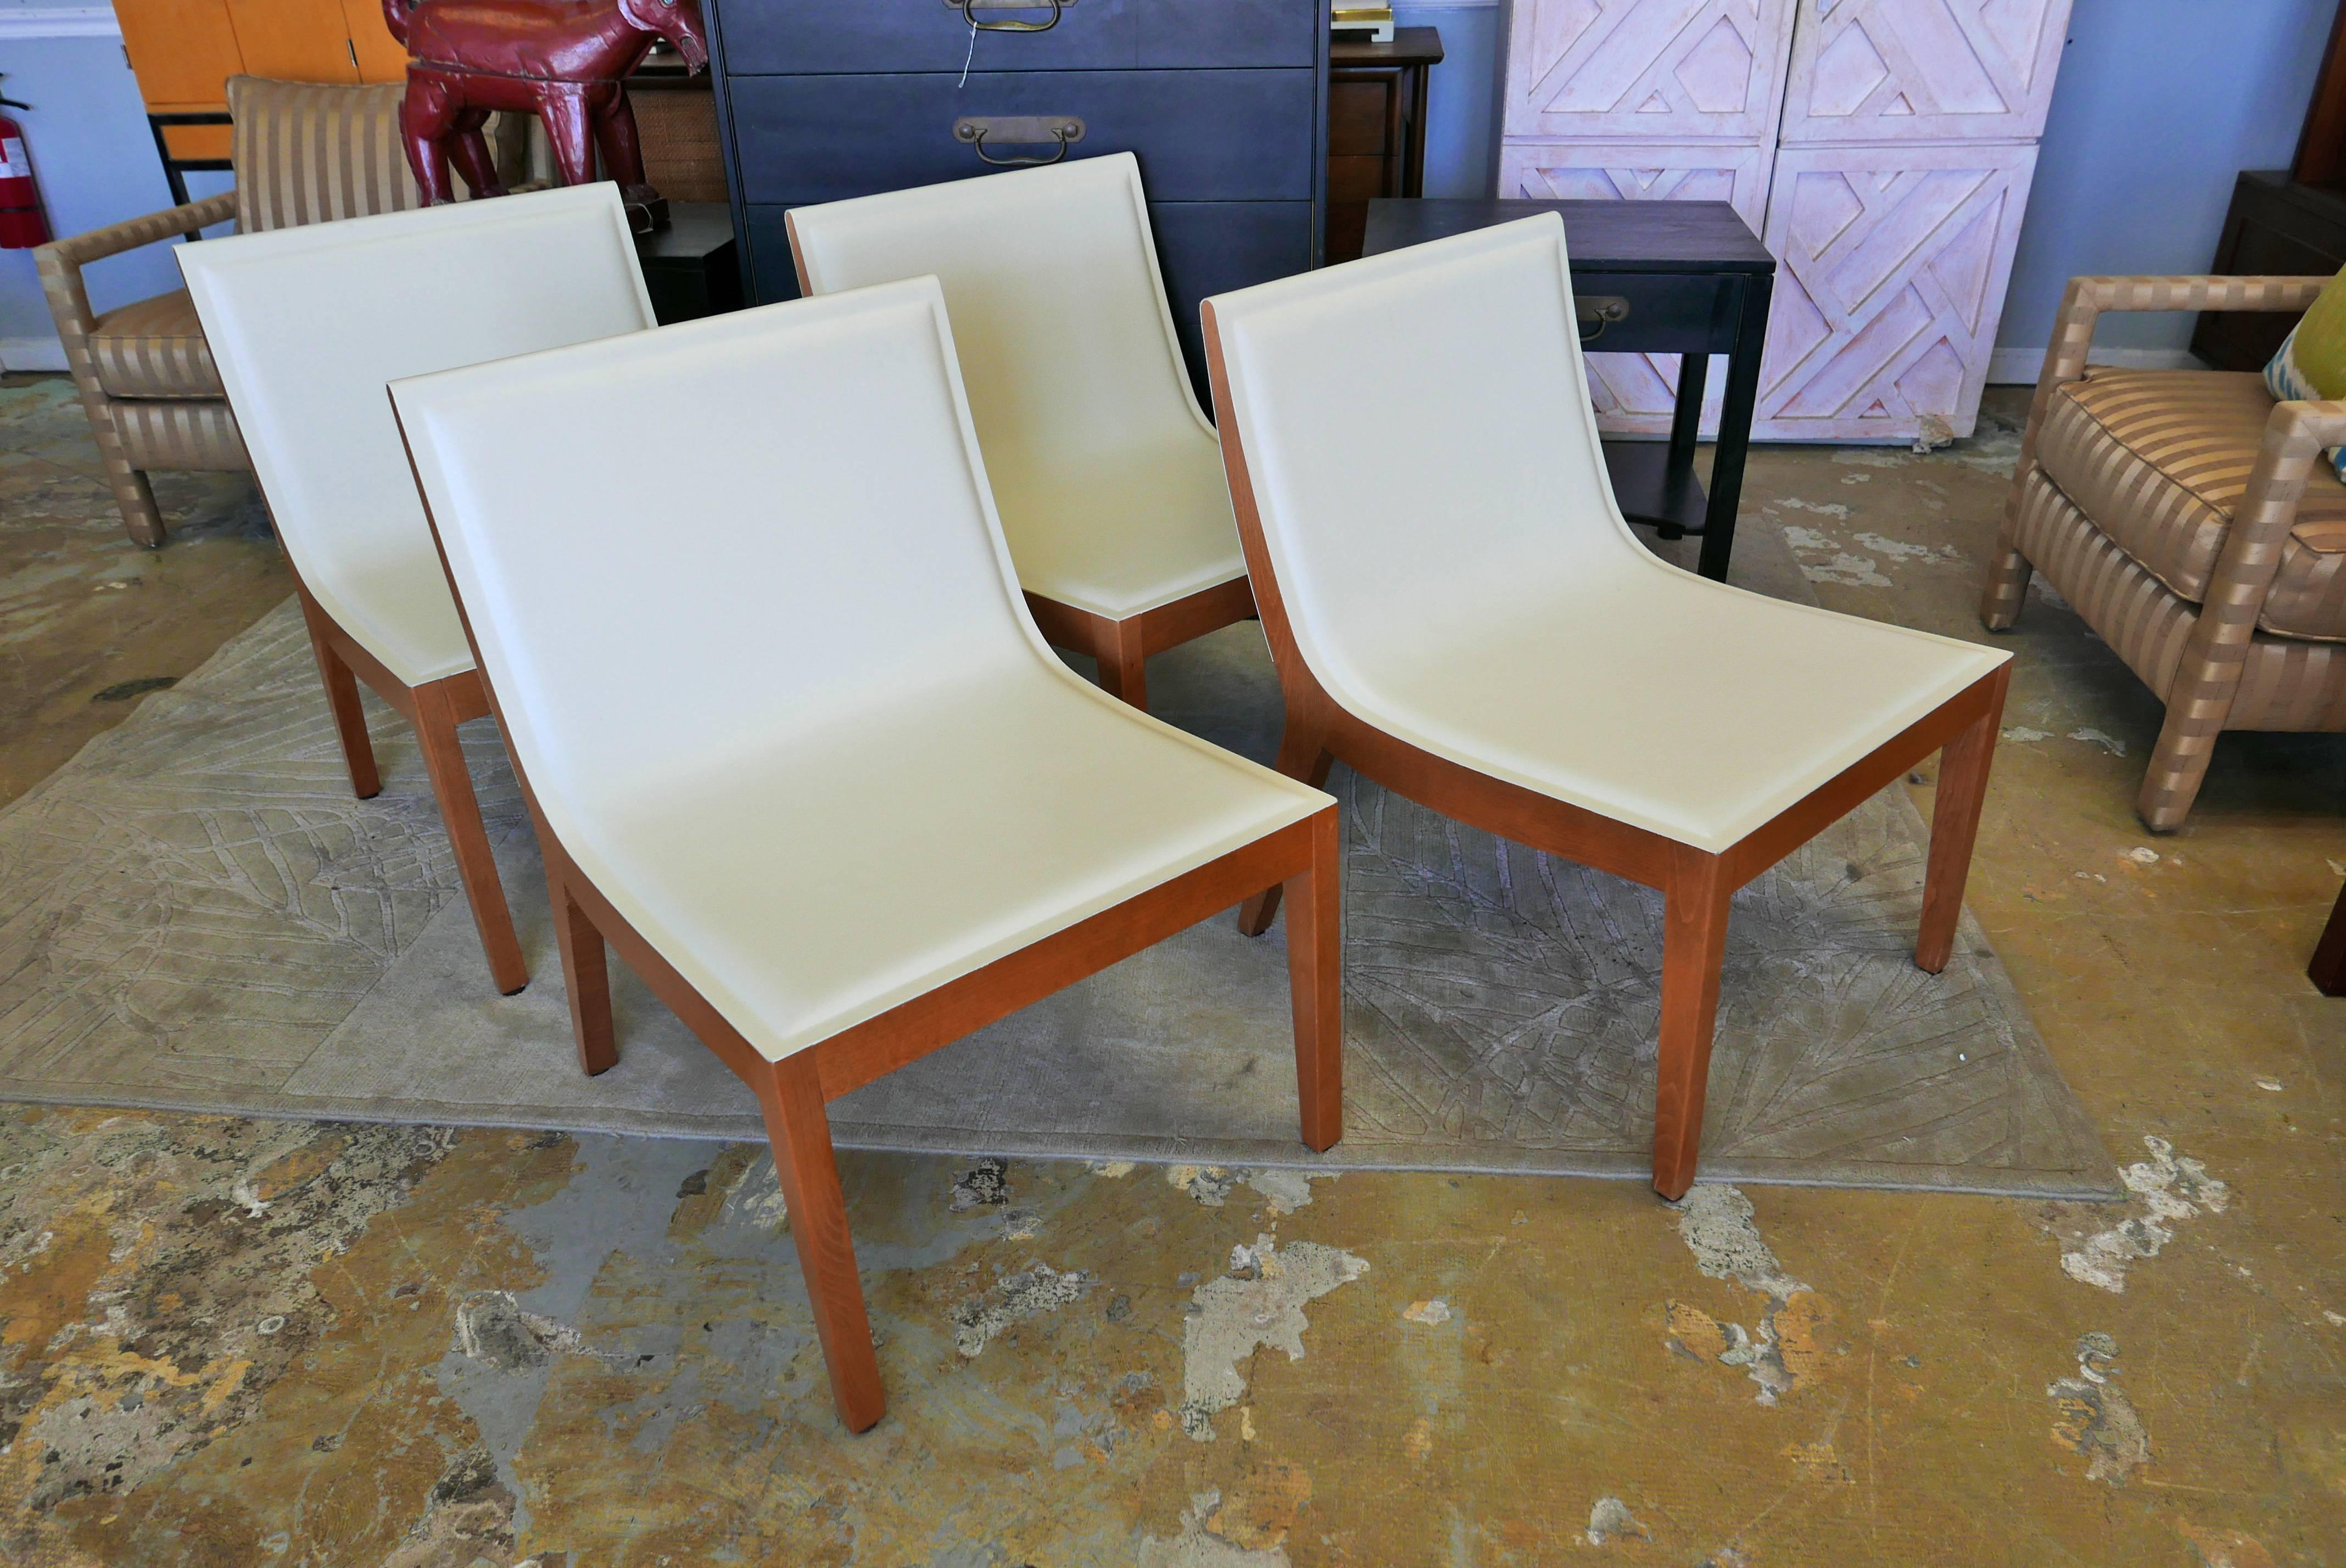 Dining - Hospitality Chairs of White Italian Leather with Maple Coffee Table 2